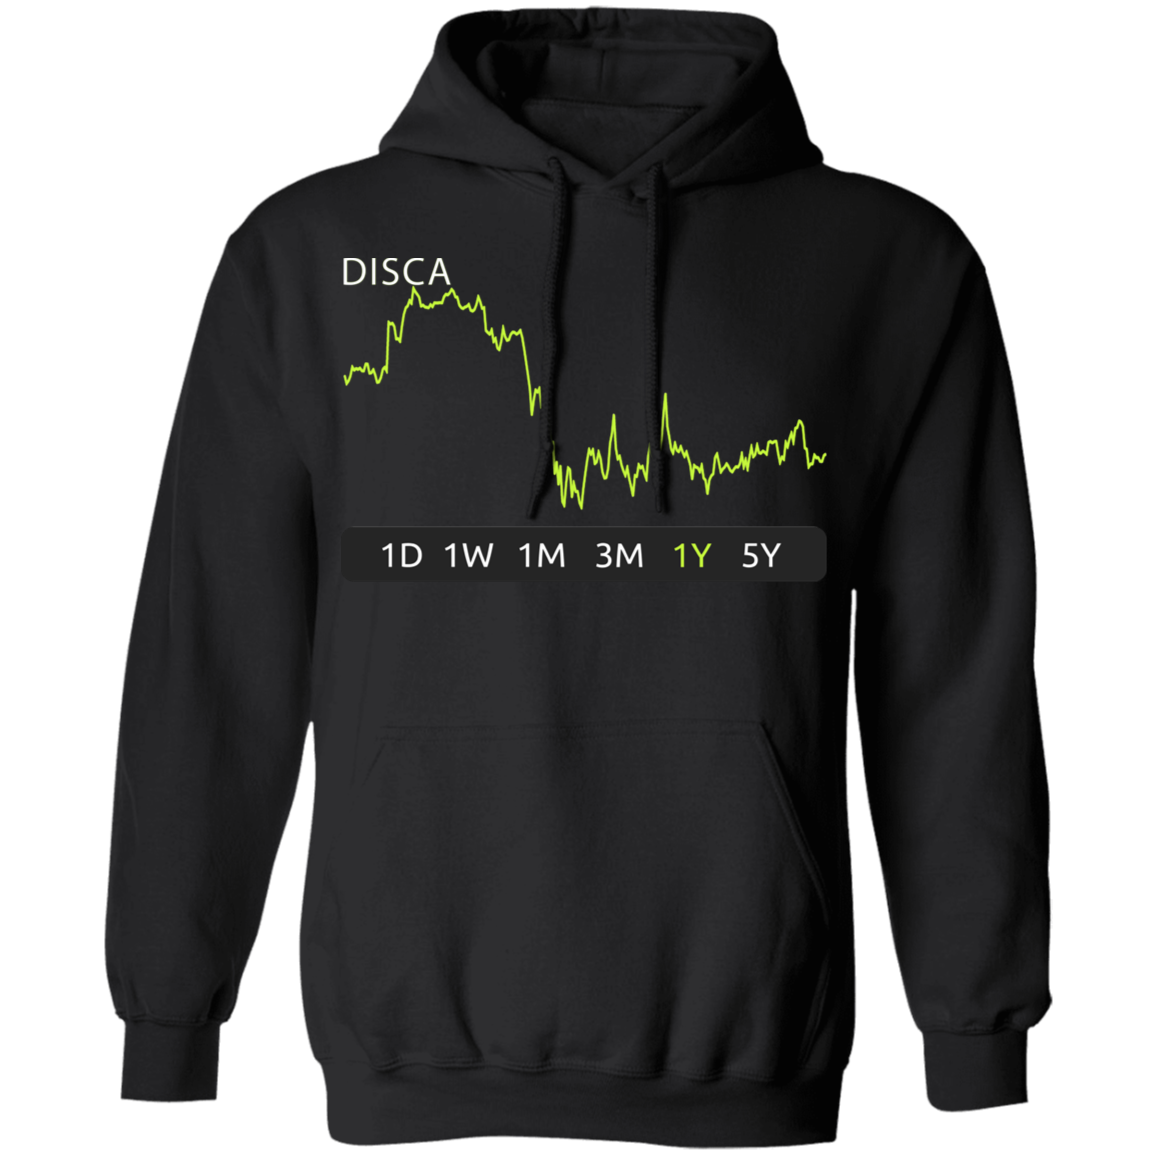 DISCA Stock 1y Pullover Hoodie